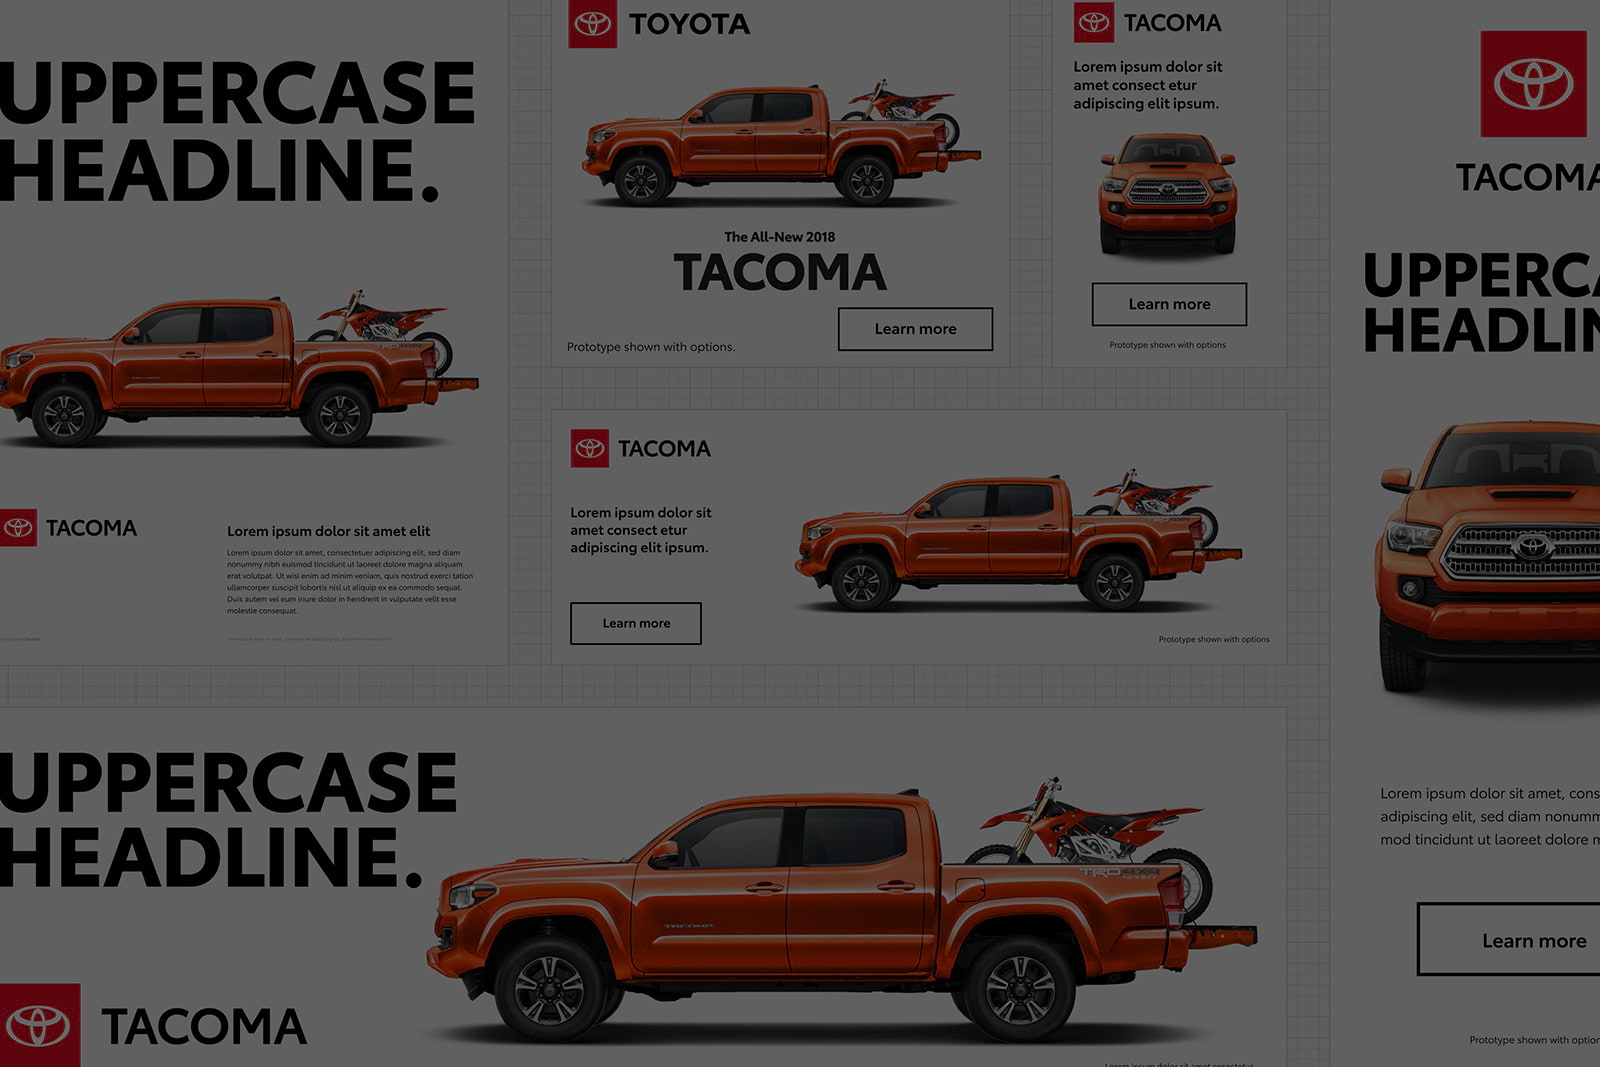 Toyota branding examples in various layouts